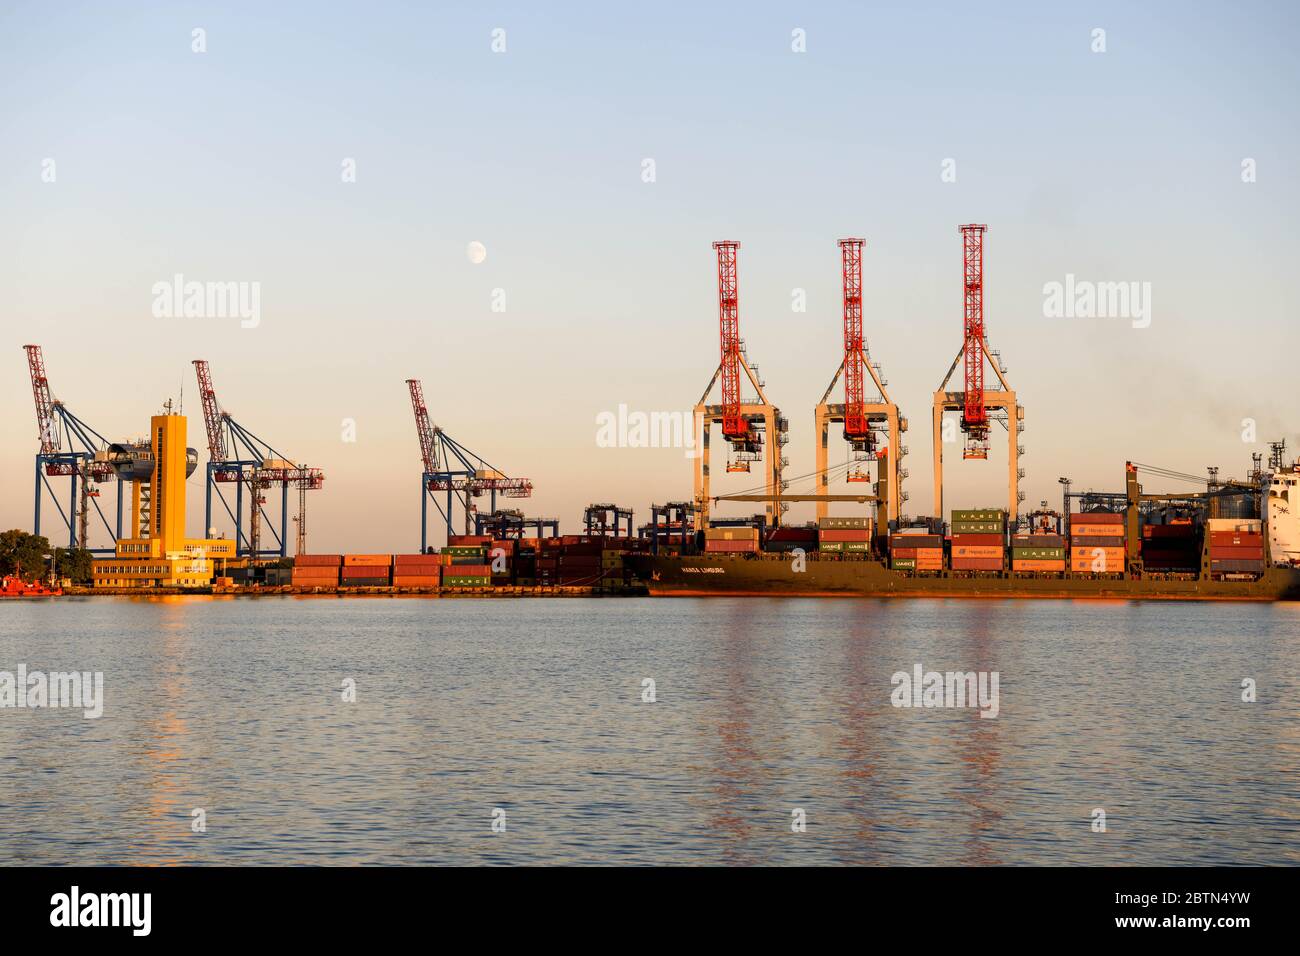 Europe, Ukraine, Odessa. The cranes in the port of Odessa at sunset with the moon in the background. Stock Photo